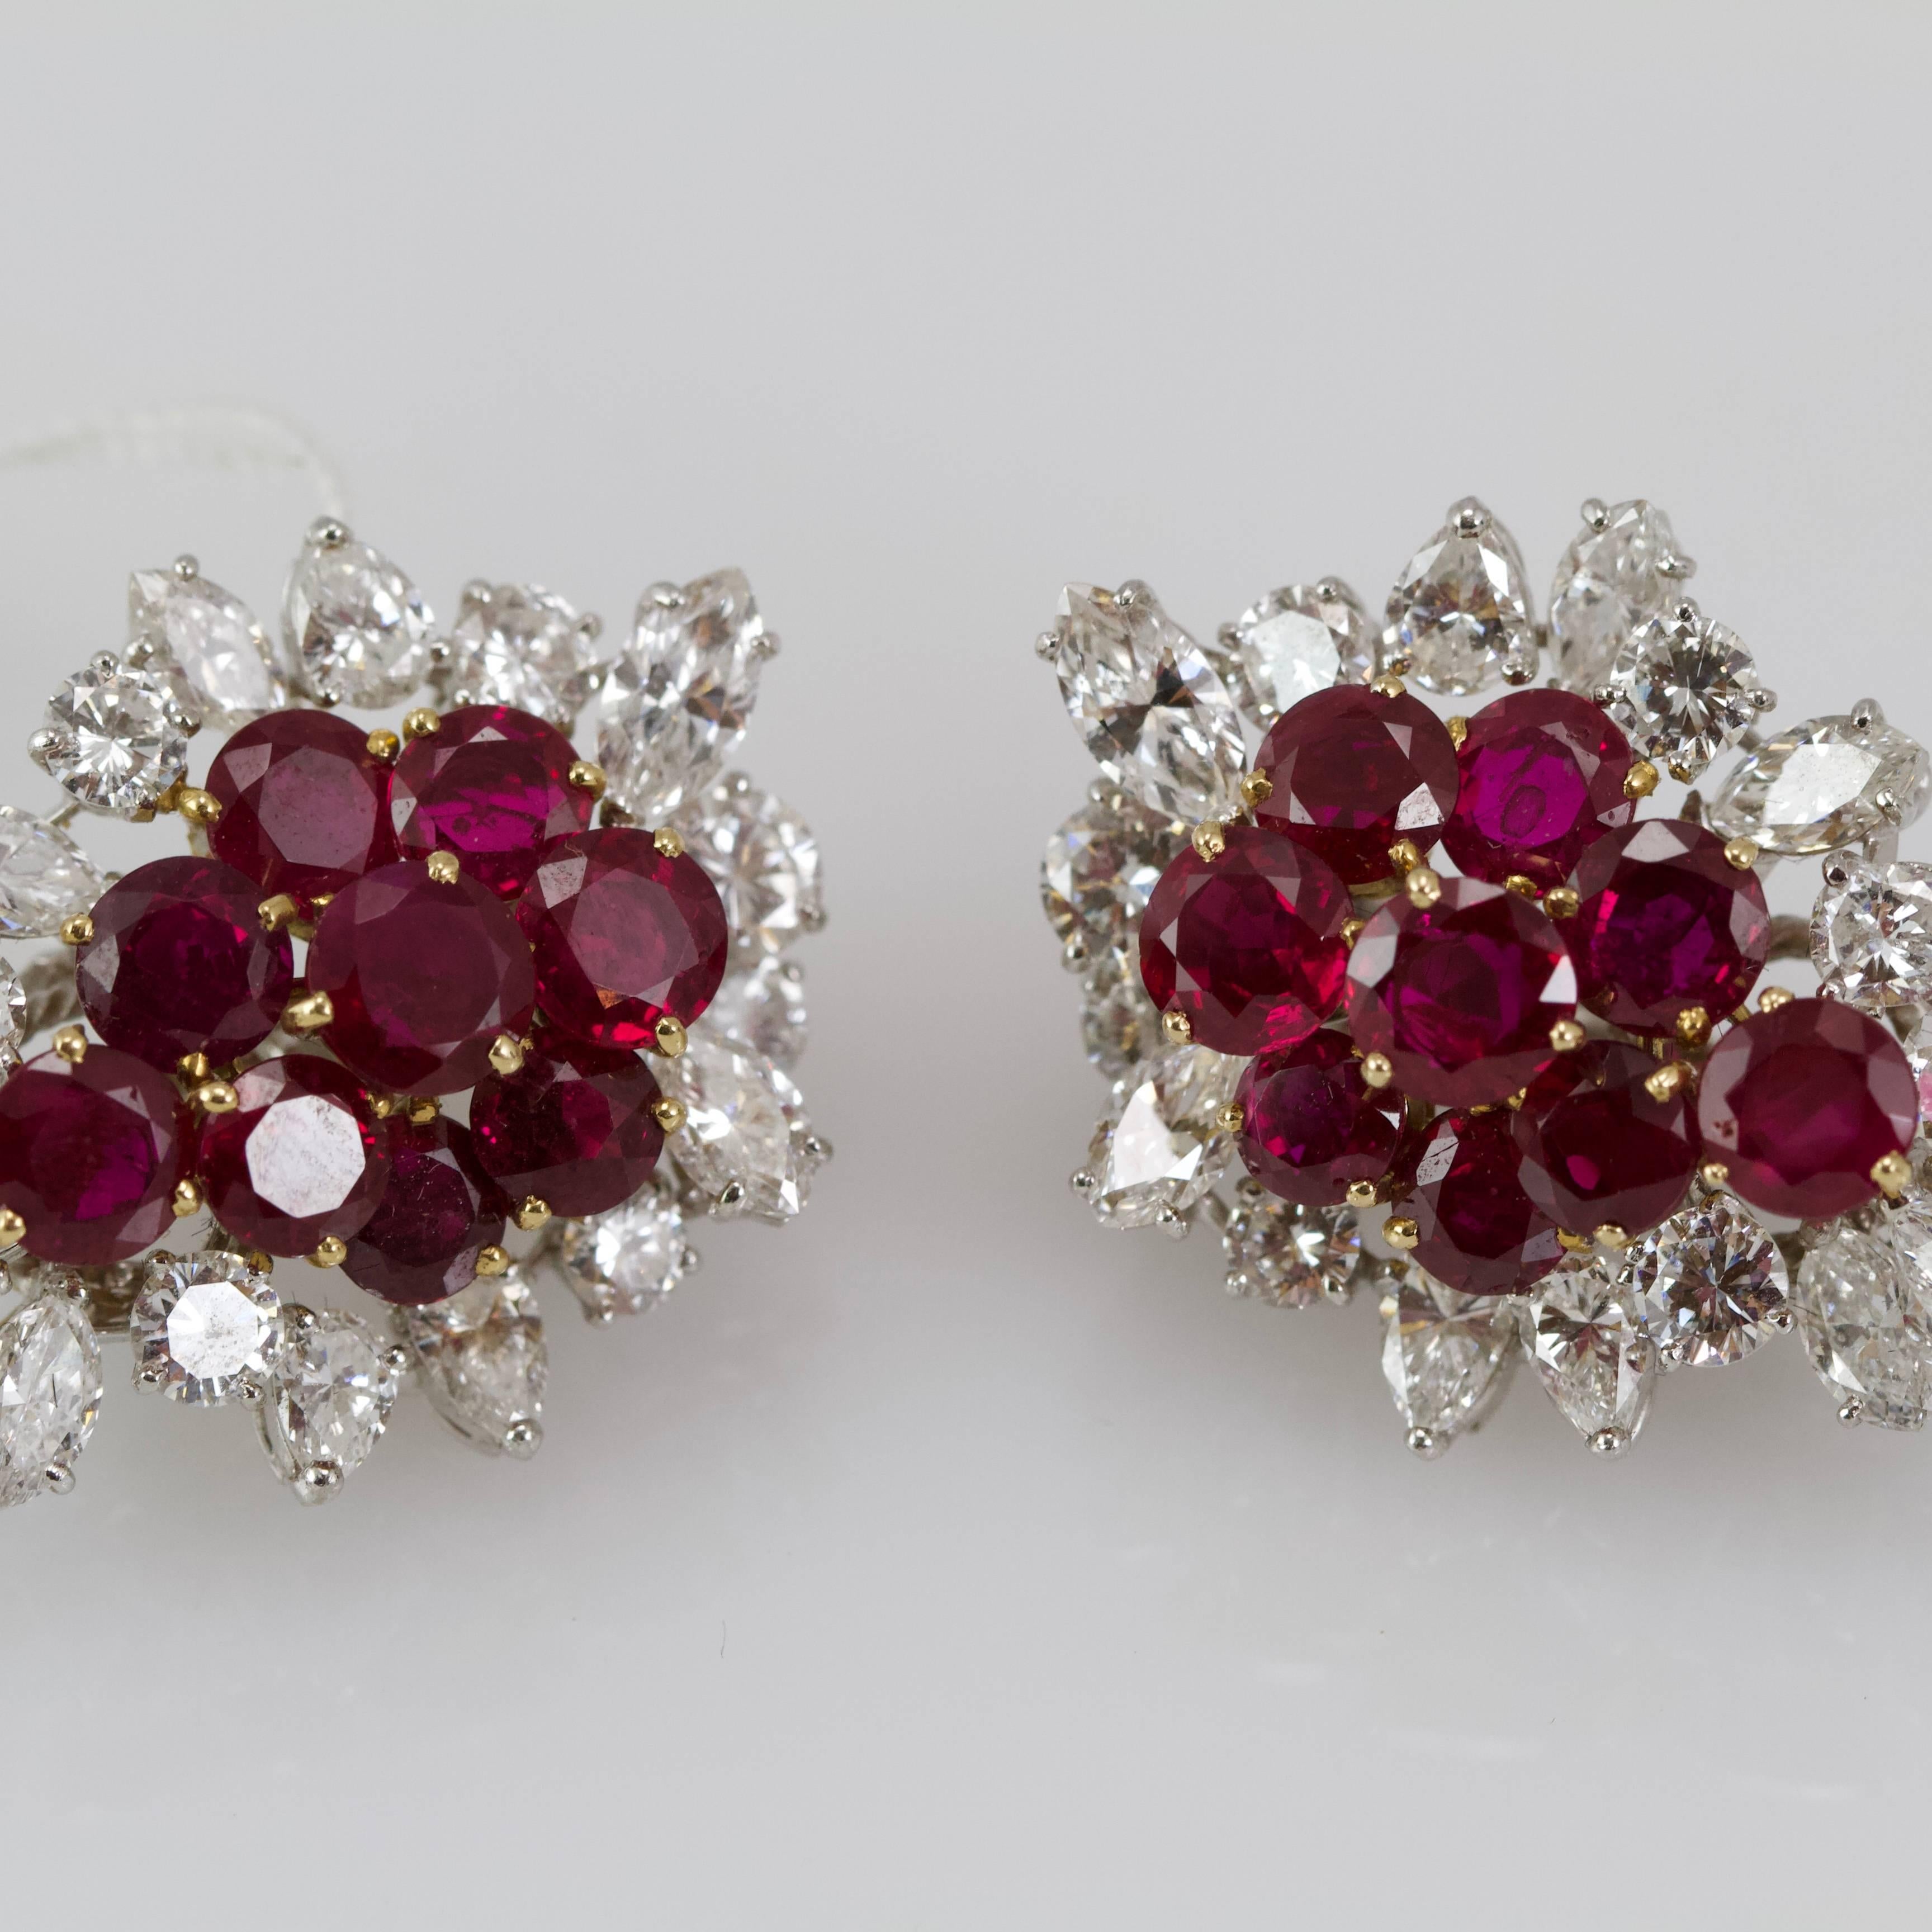 High jewelry french work. 
A pair of ear clips set with 18 round facetted rubies bordered by marquise, pear, and brillant shape diamonds. 
Total weight of diamonds almost 5 carats
Total weight of rubies almost 5 carats.
Rubies presents